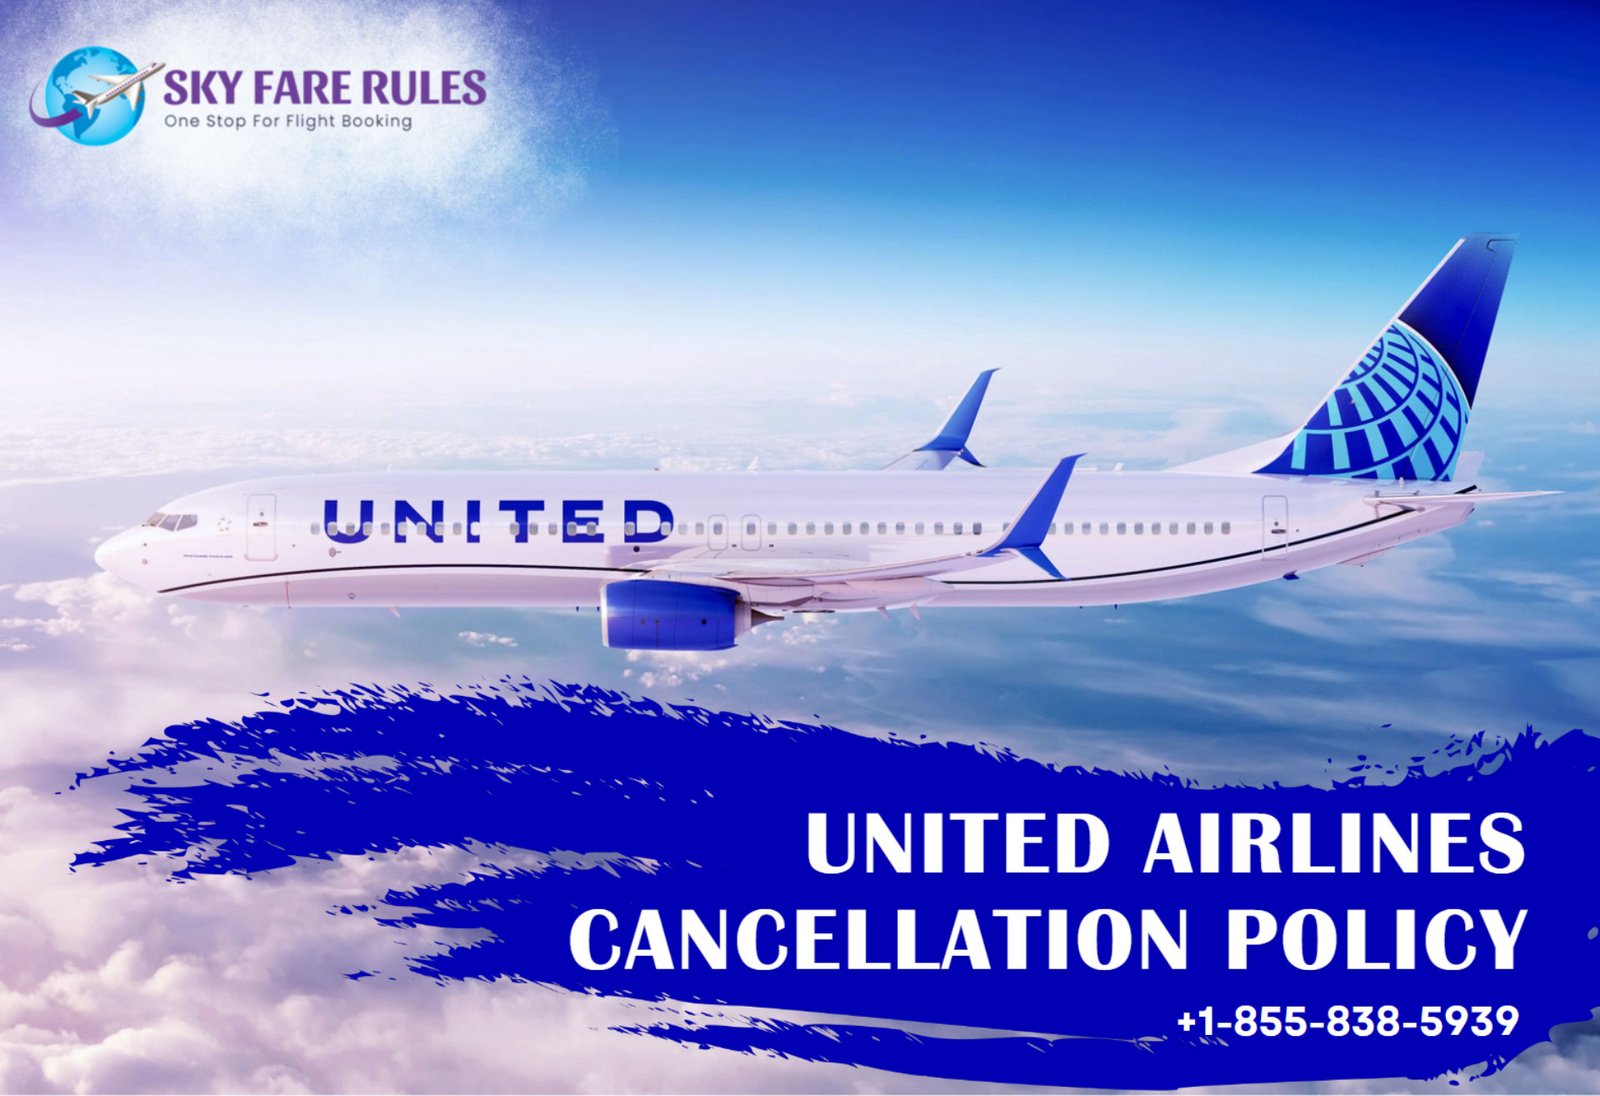 United Airlines Cancellation Policy | Sky Fare Rules